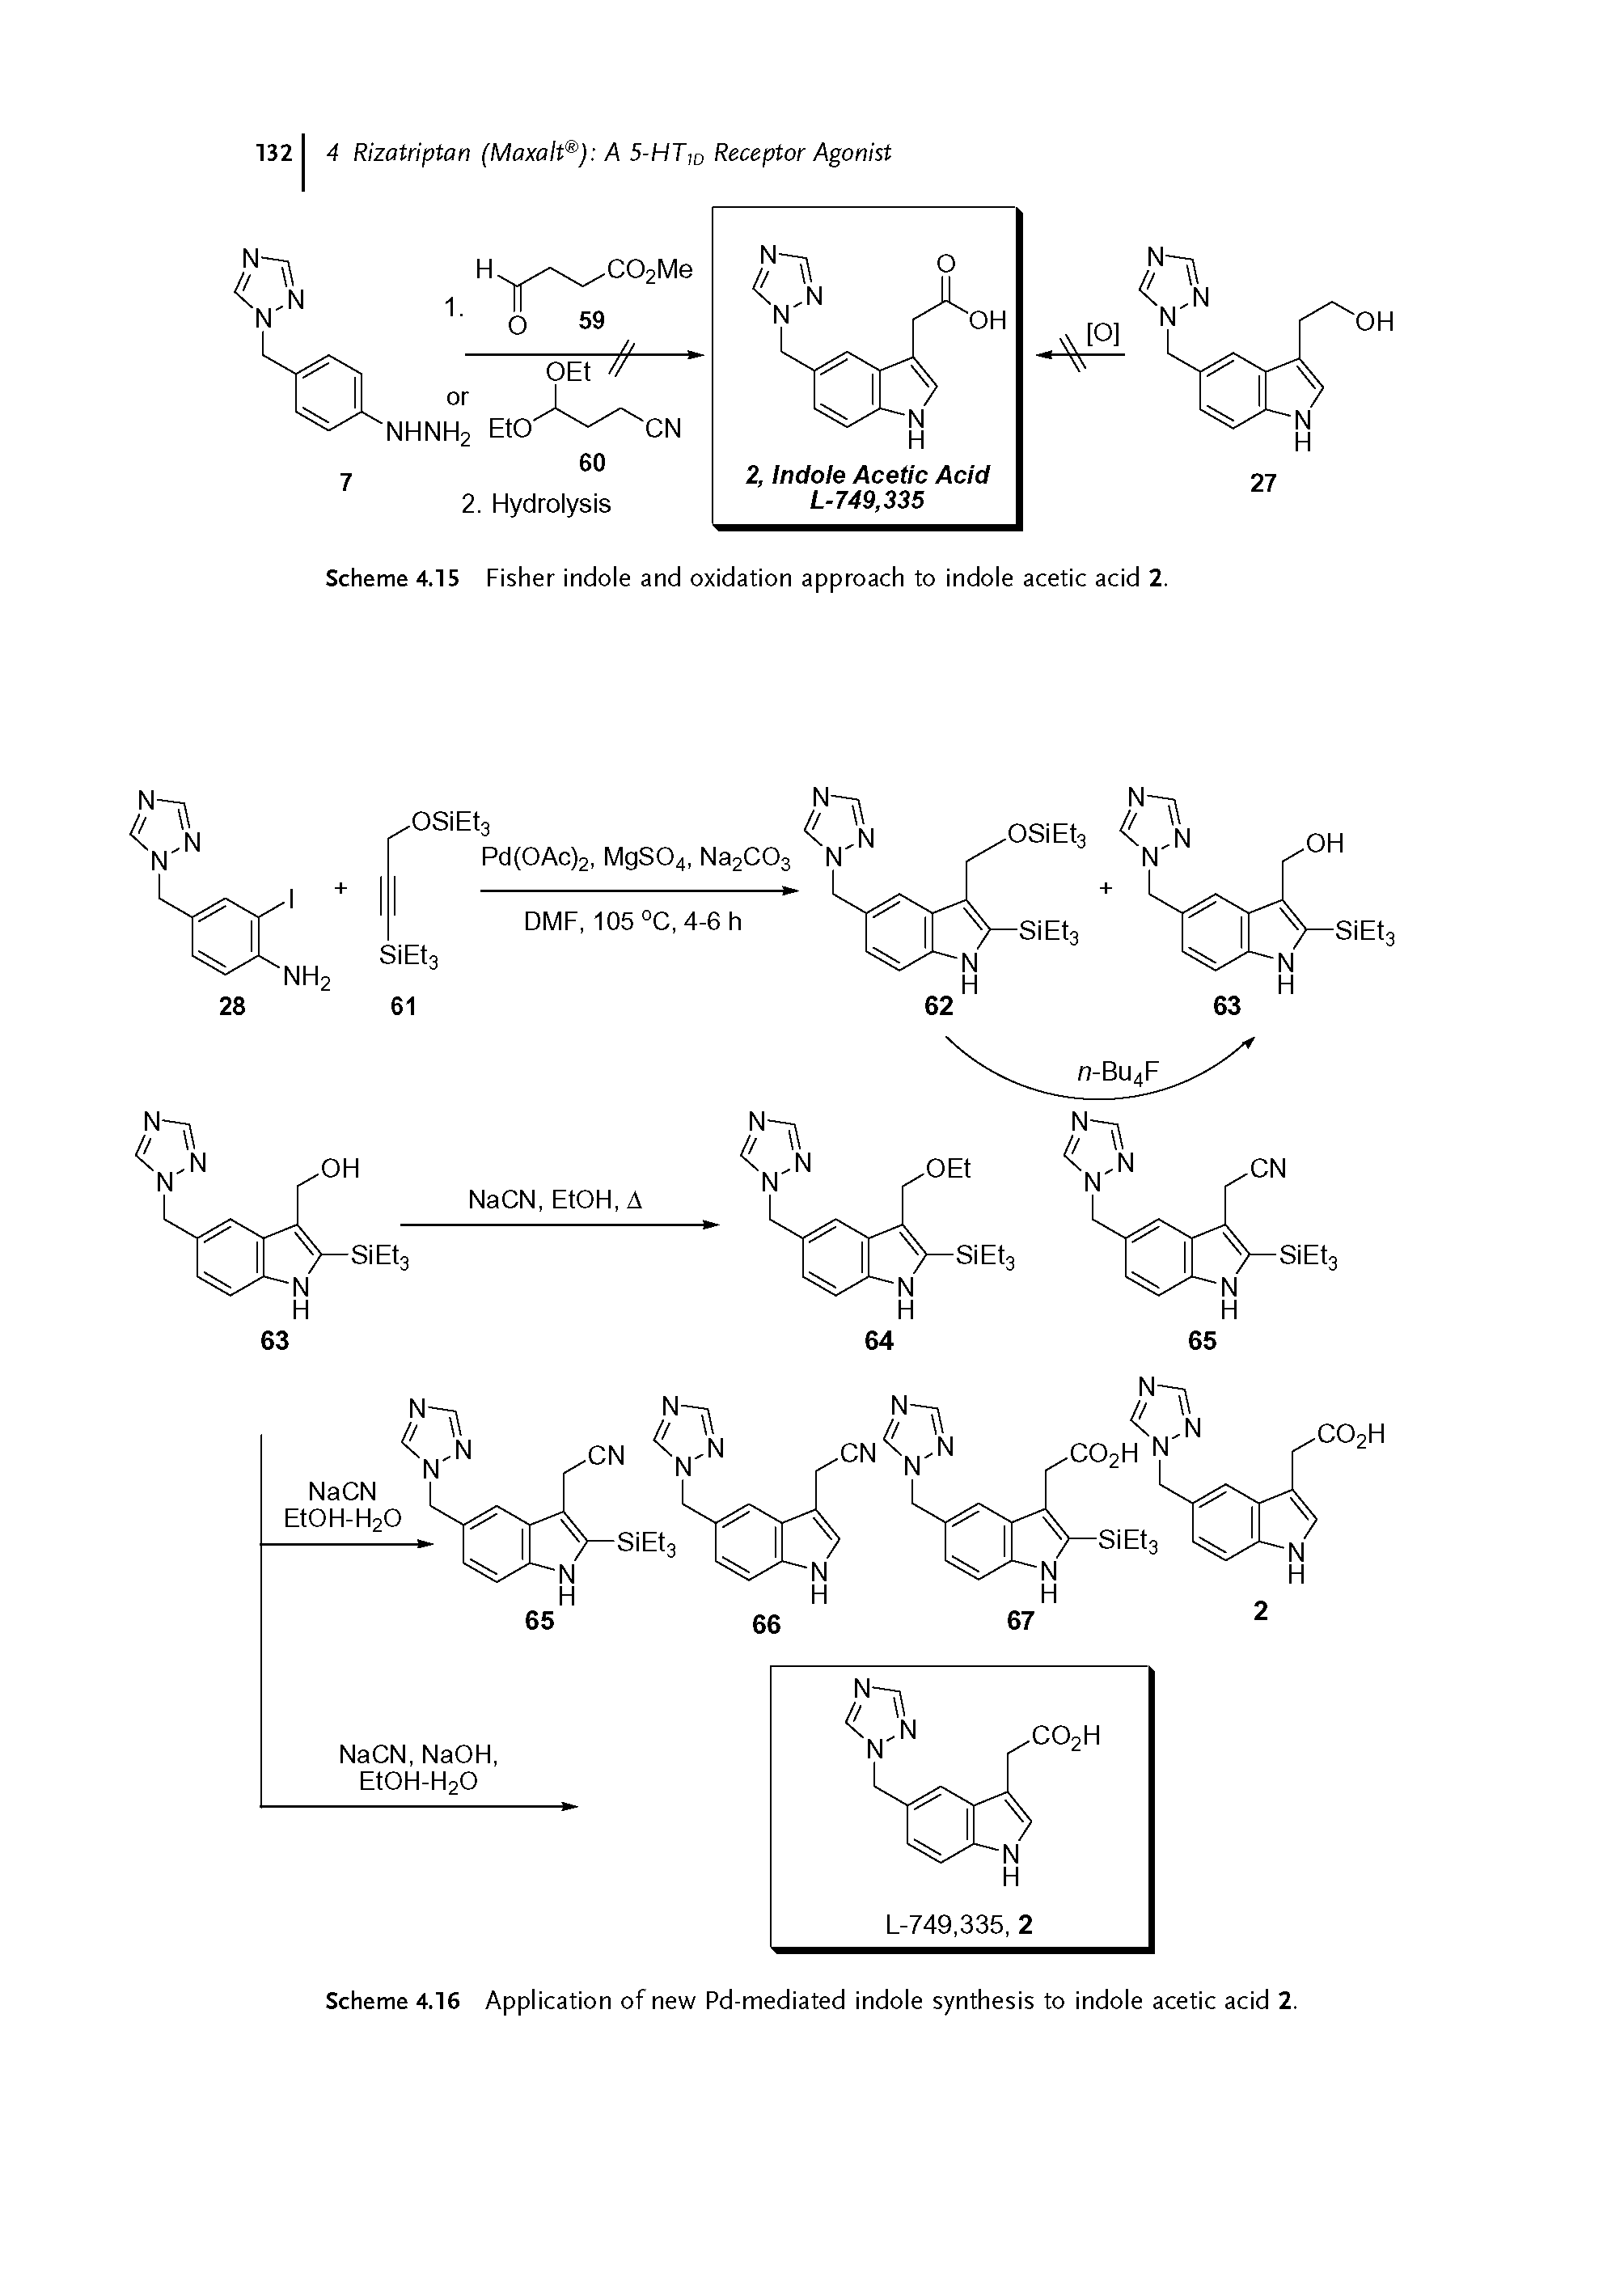 Scheme 4.15 Fisher indole and oxidation approach to indole acetic acid 2.